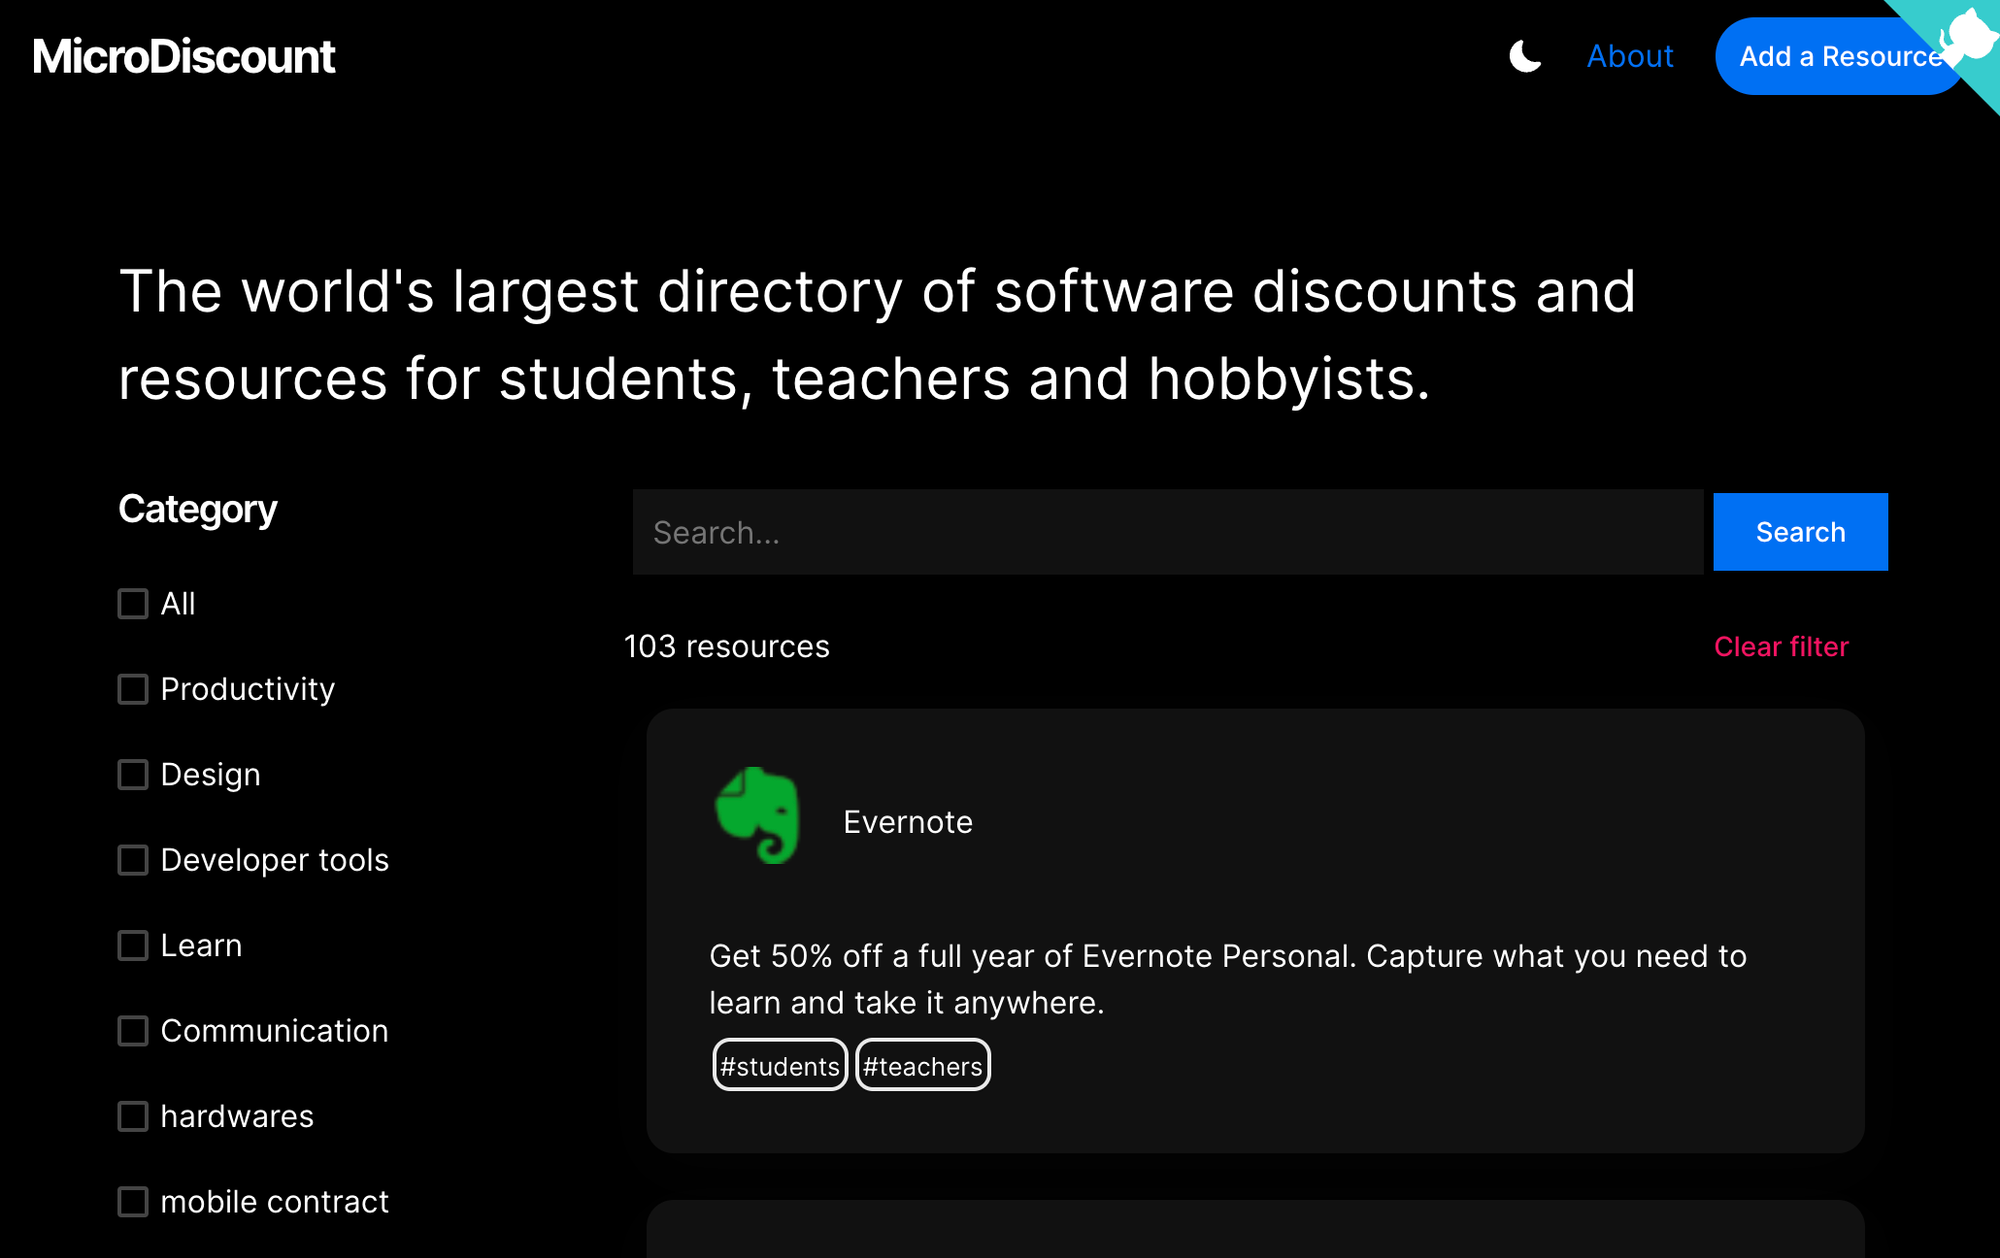 MicroDiscount - Discounts for students and teacher